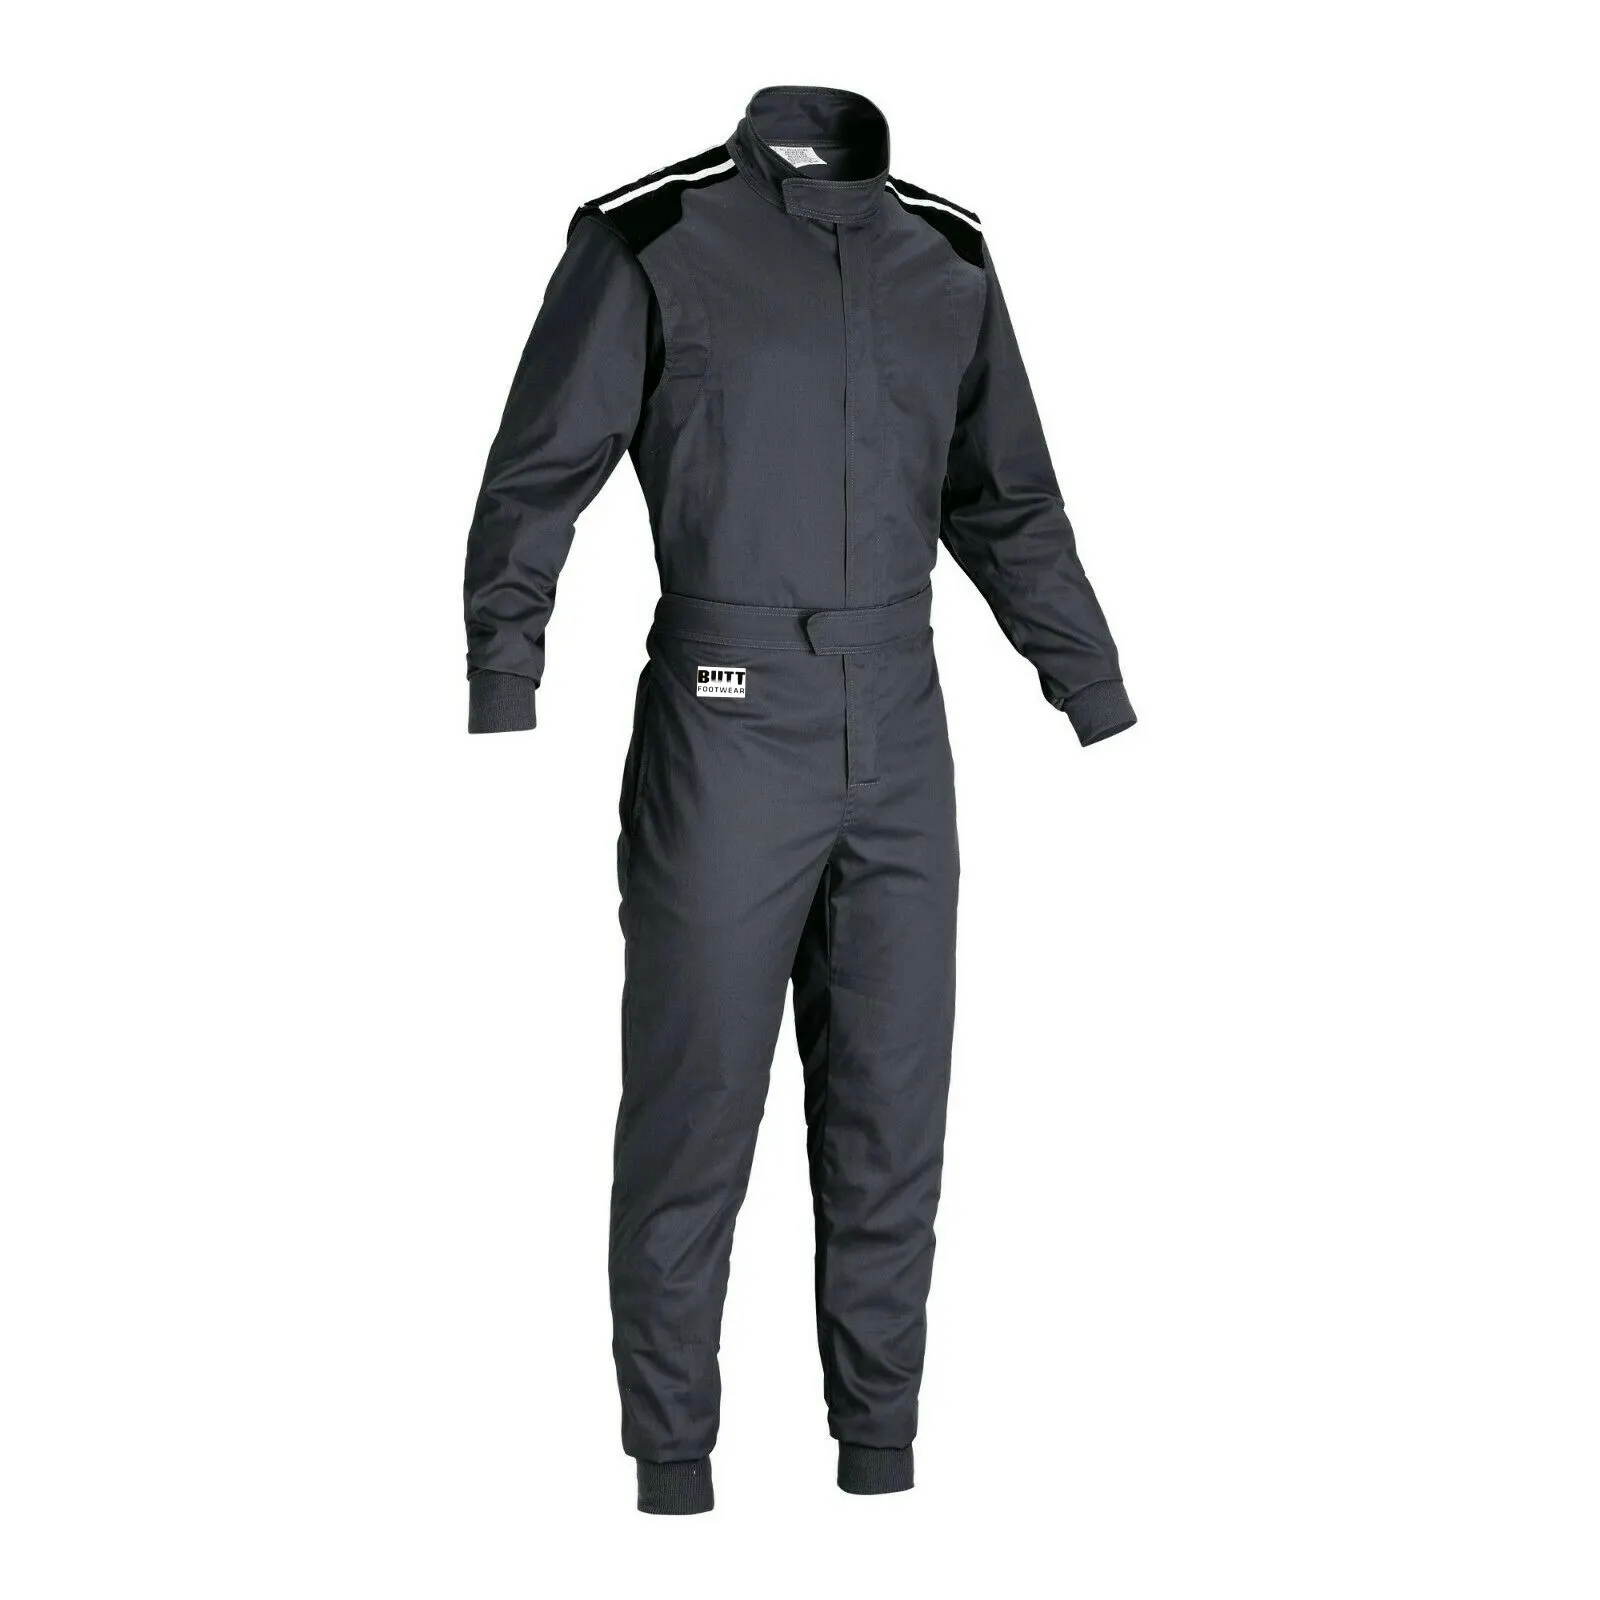 Windbreaker Suits For Car Racers Customized made Best Quality kart Racing suits With Customized Design & Logo